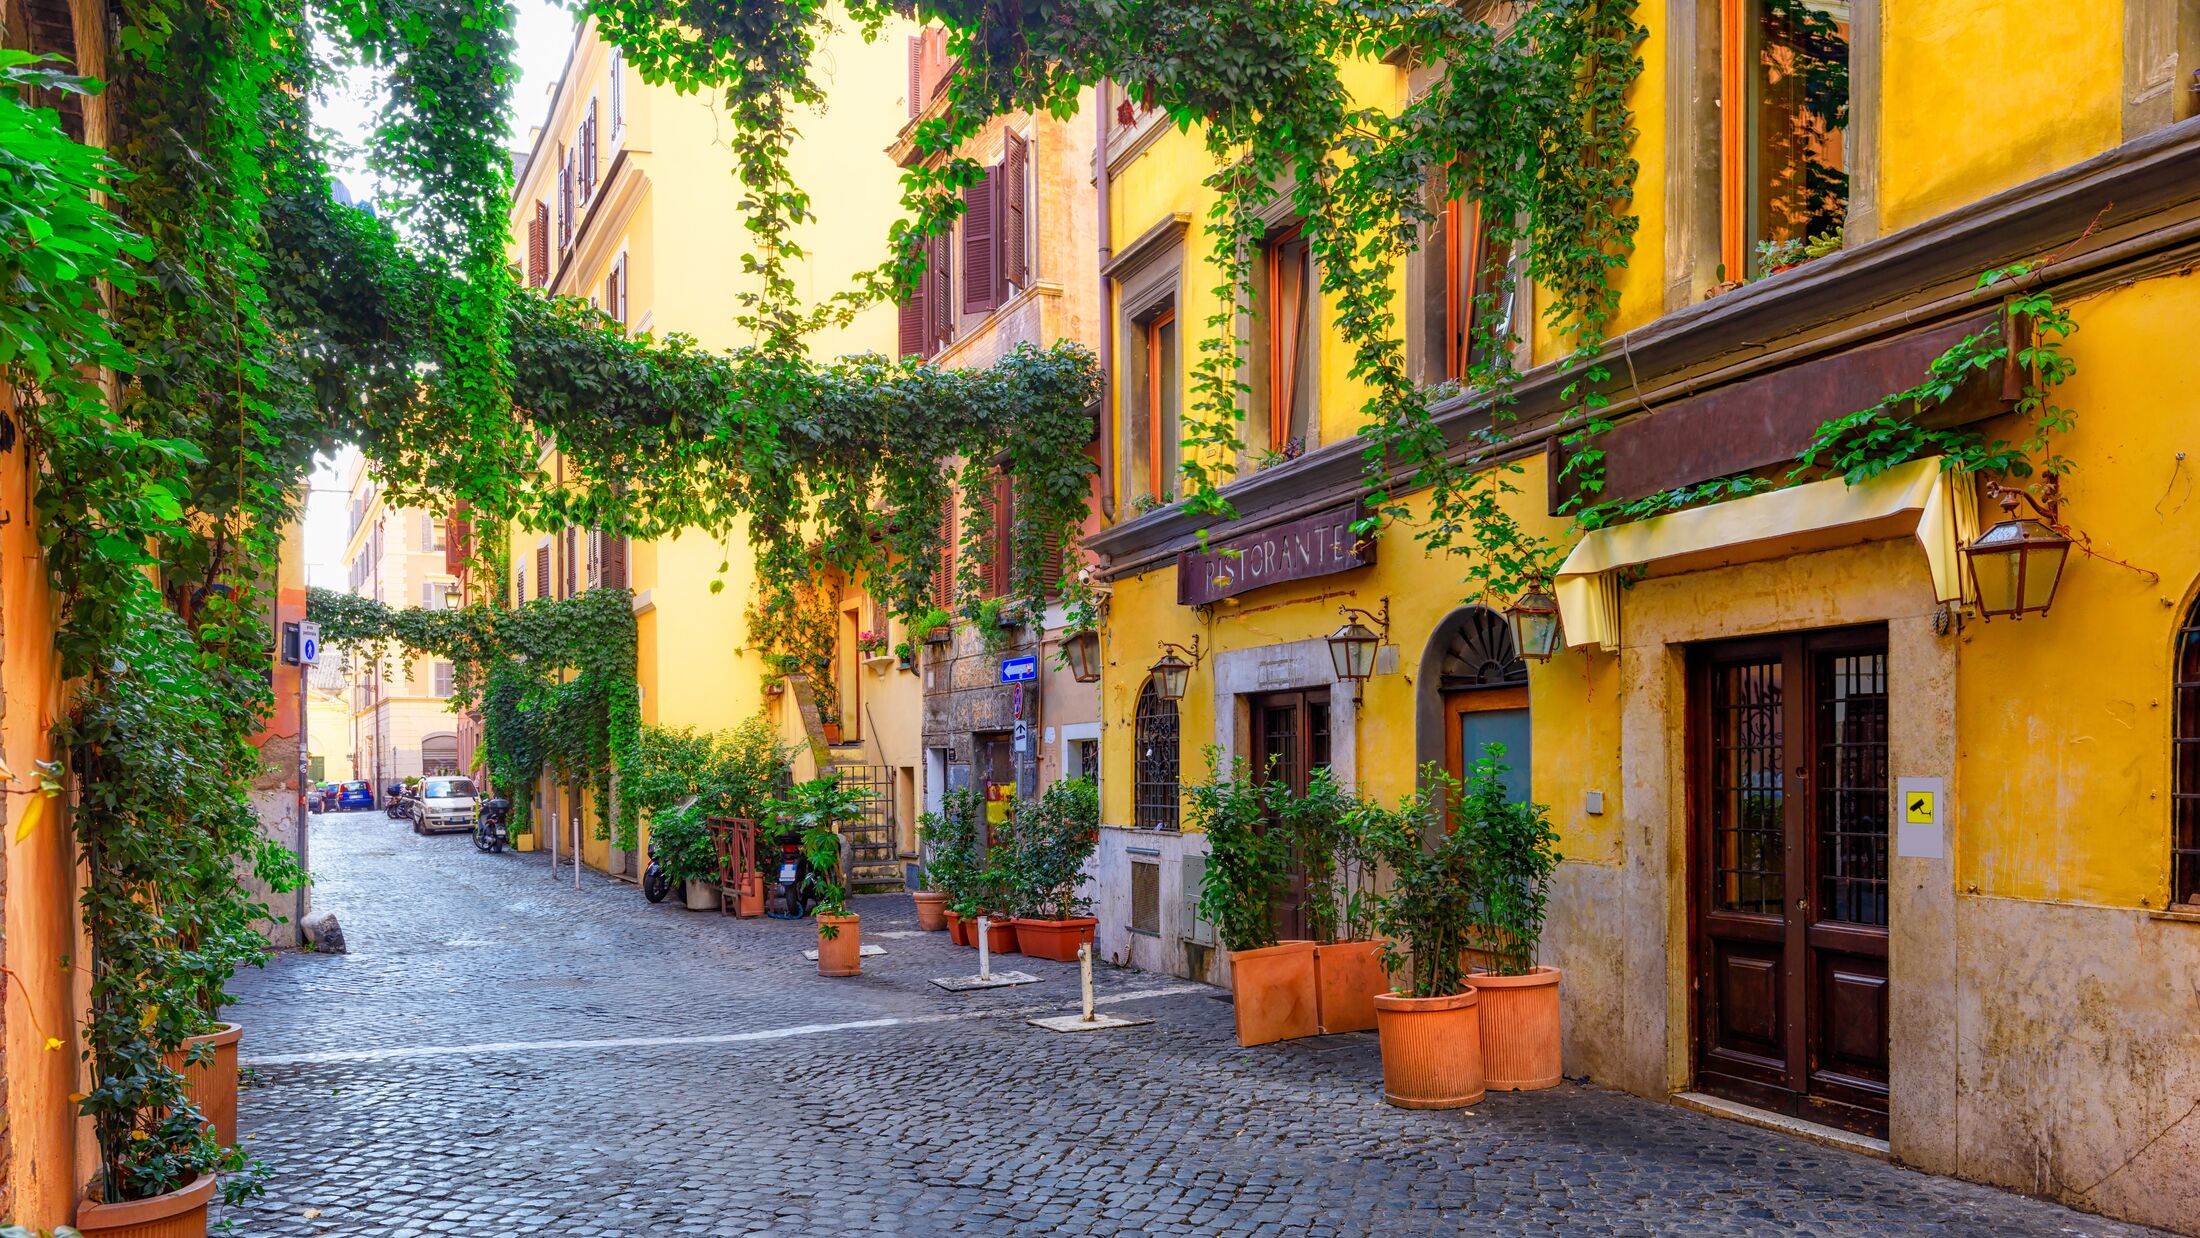 Cozy old street in Trastevere in Rome, Italy. Trastevere is rione of Rome, on the west bank of the Tiber in Rome, Lazio, Italy.  Architecture and landmark of Rome